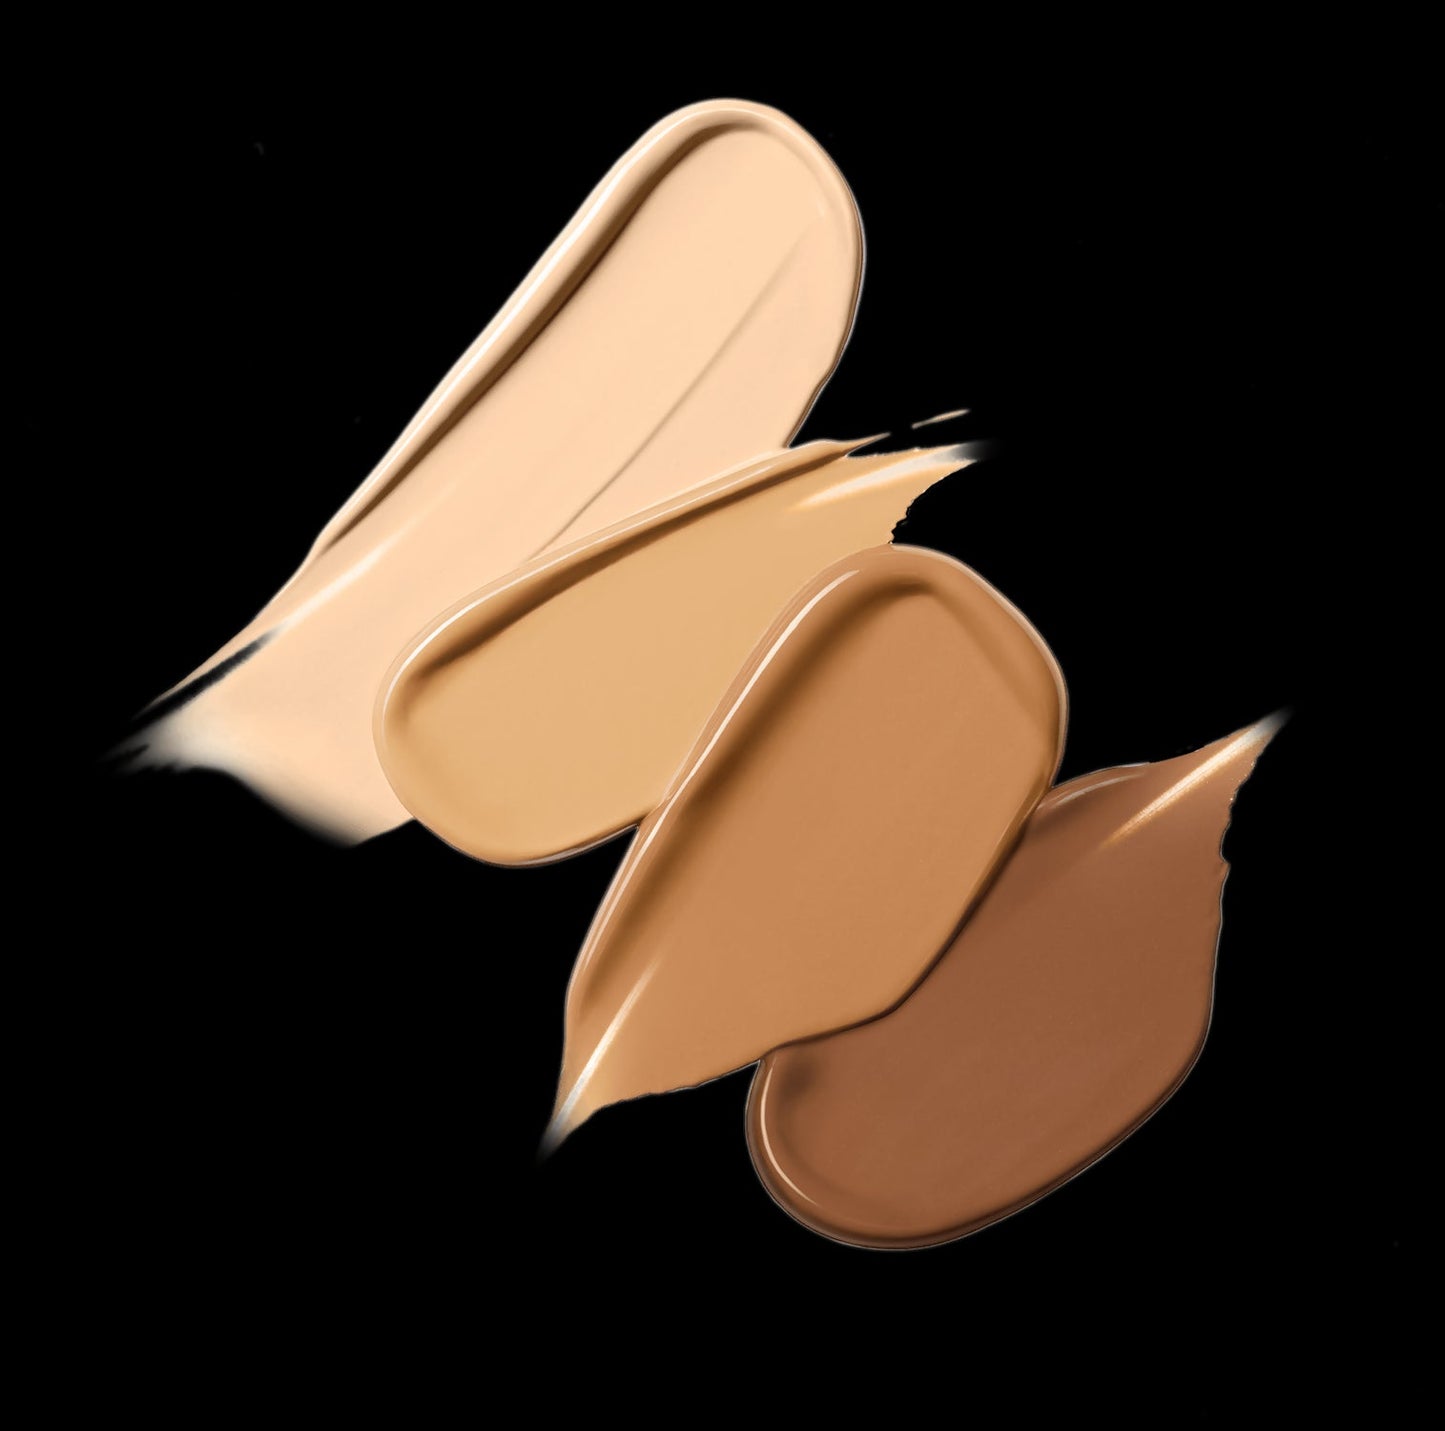 Clinique Even Better All-Over Concealer WN 80 Tawnied Beige